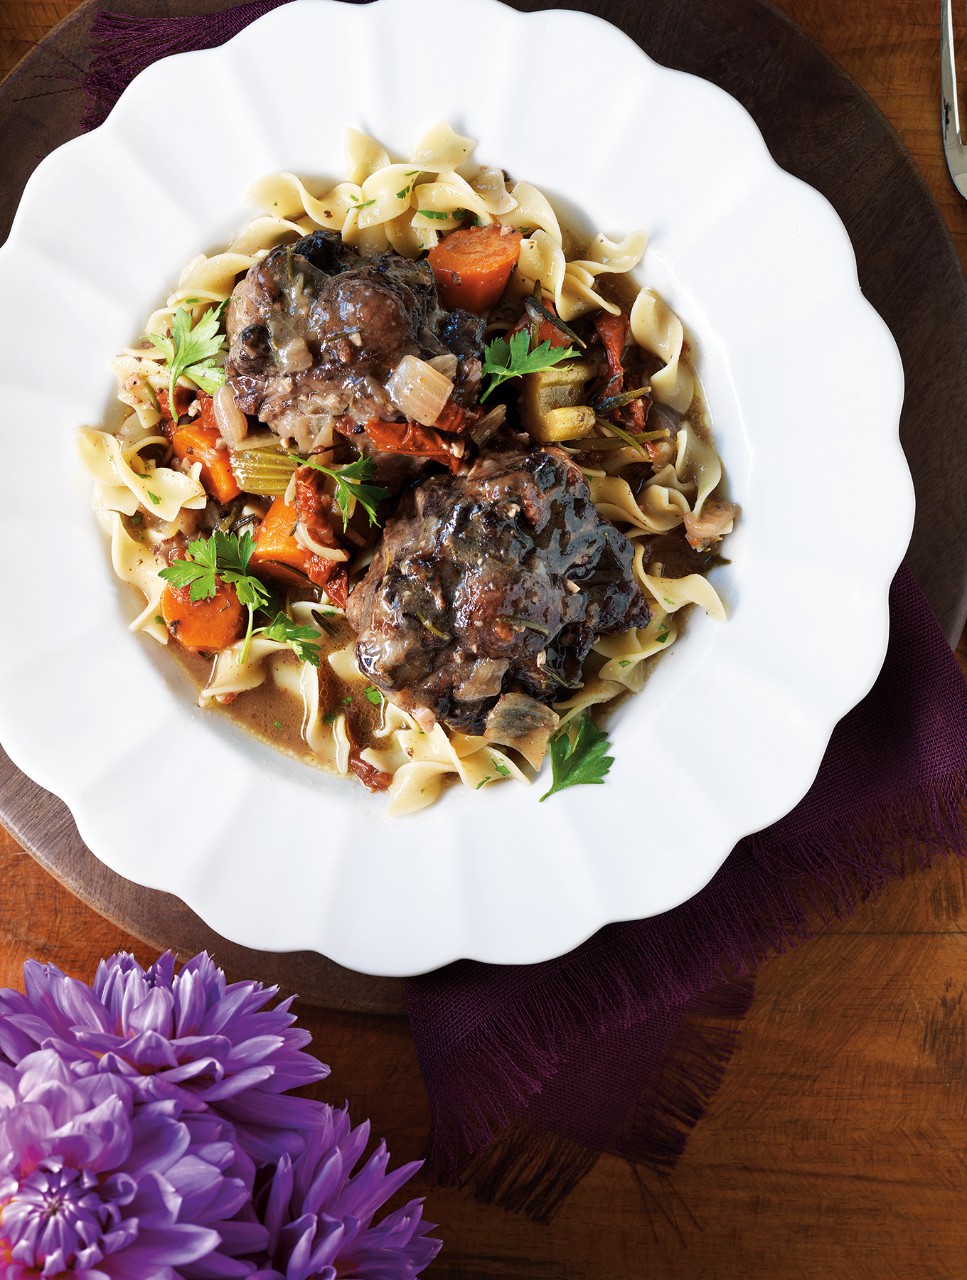 Rosemary & Wine-Braised Oxtails